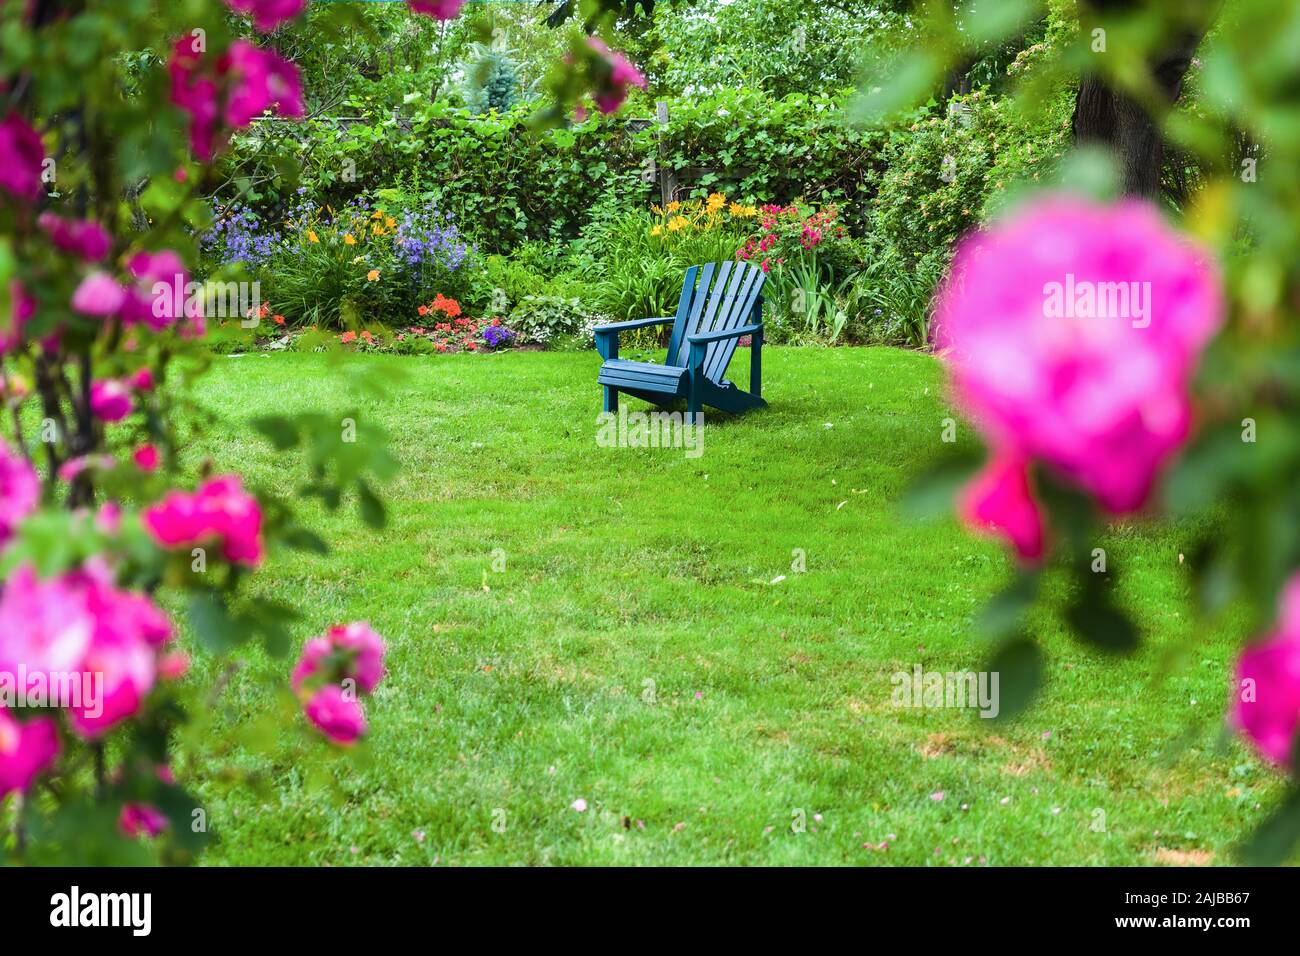 A lawn chair on the lawn in a rose garden. Stock Photo